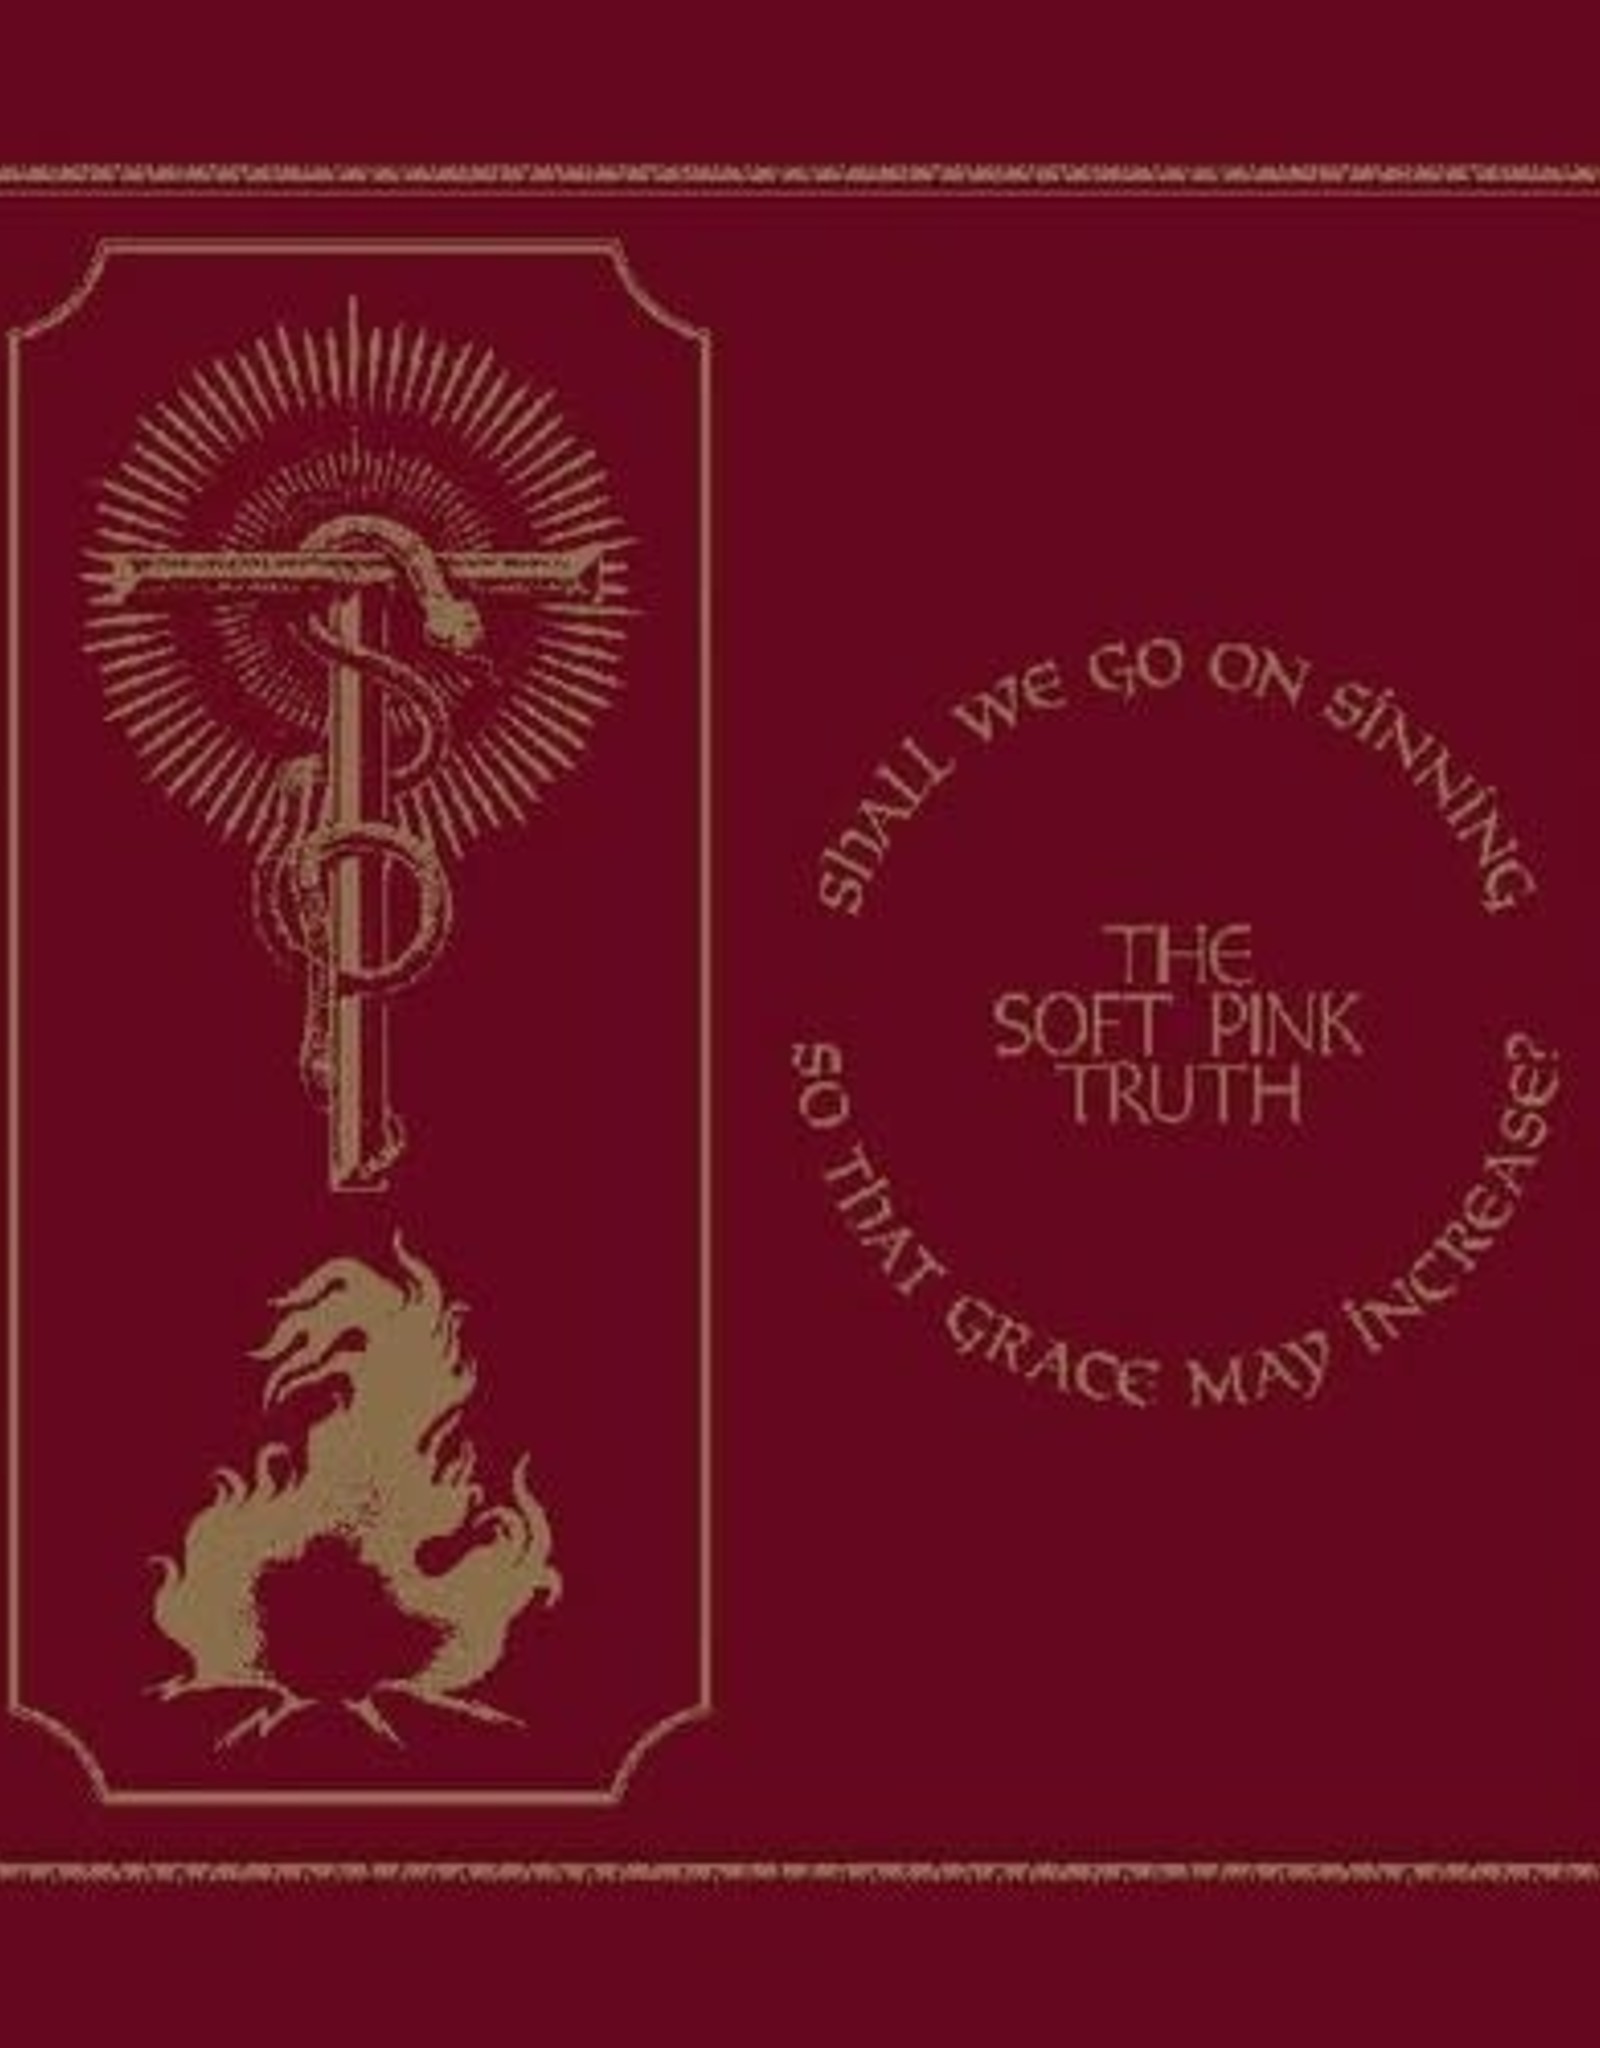 The Soft Pink Truth - Shall We Go On Sinning So That Grace May Increase (Limited Edition, Gold, Indie Exclusive)